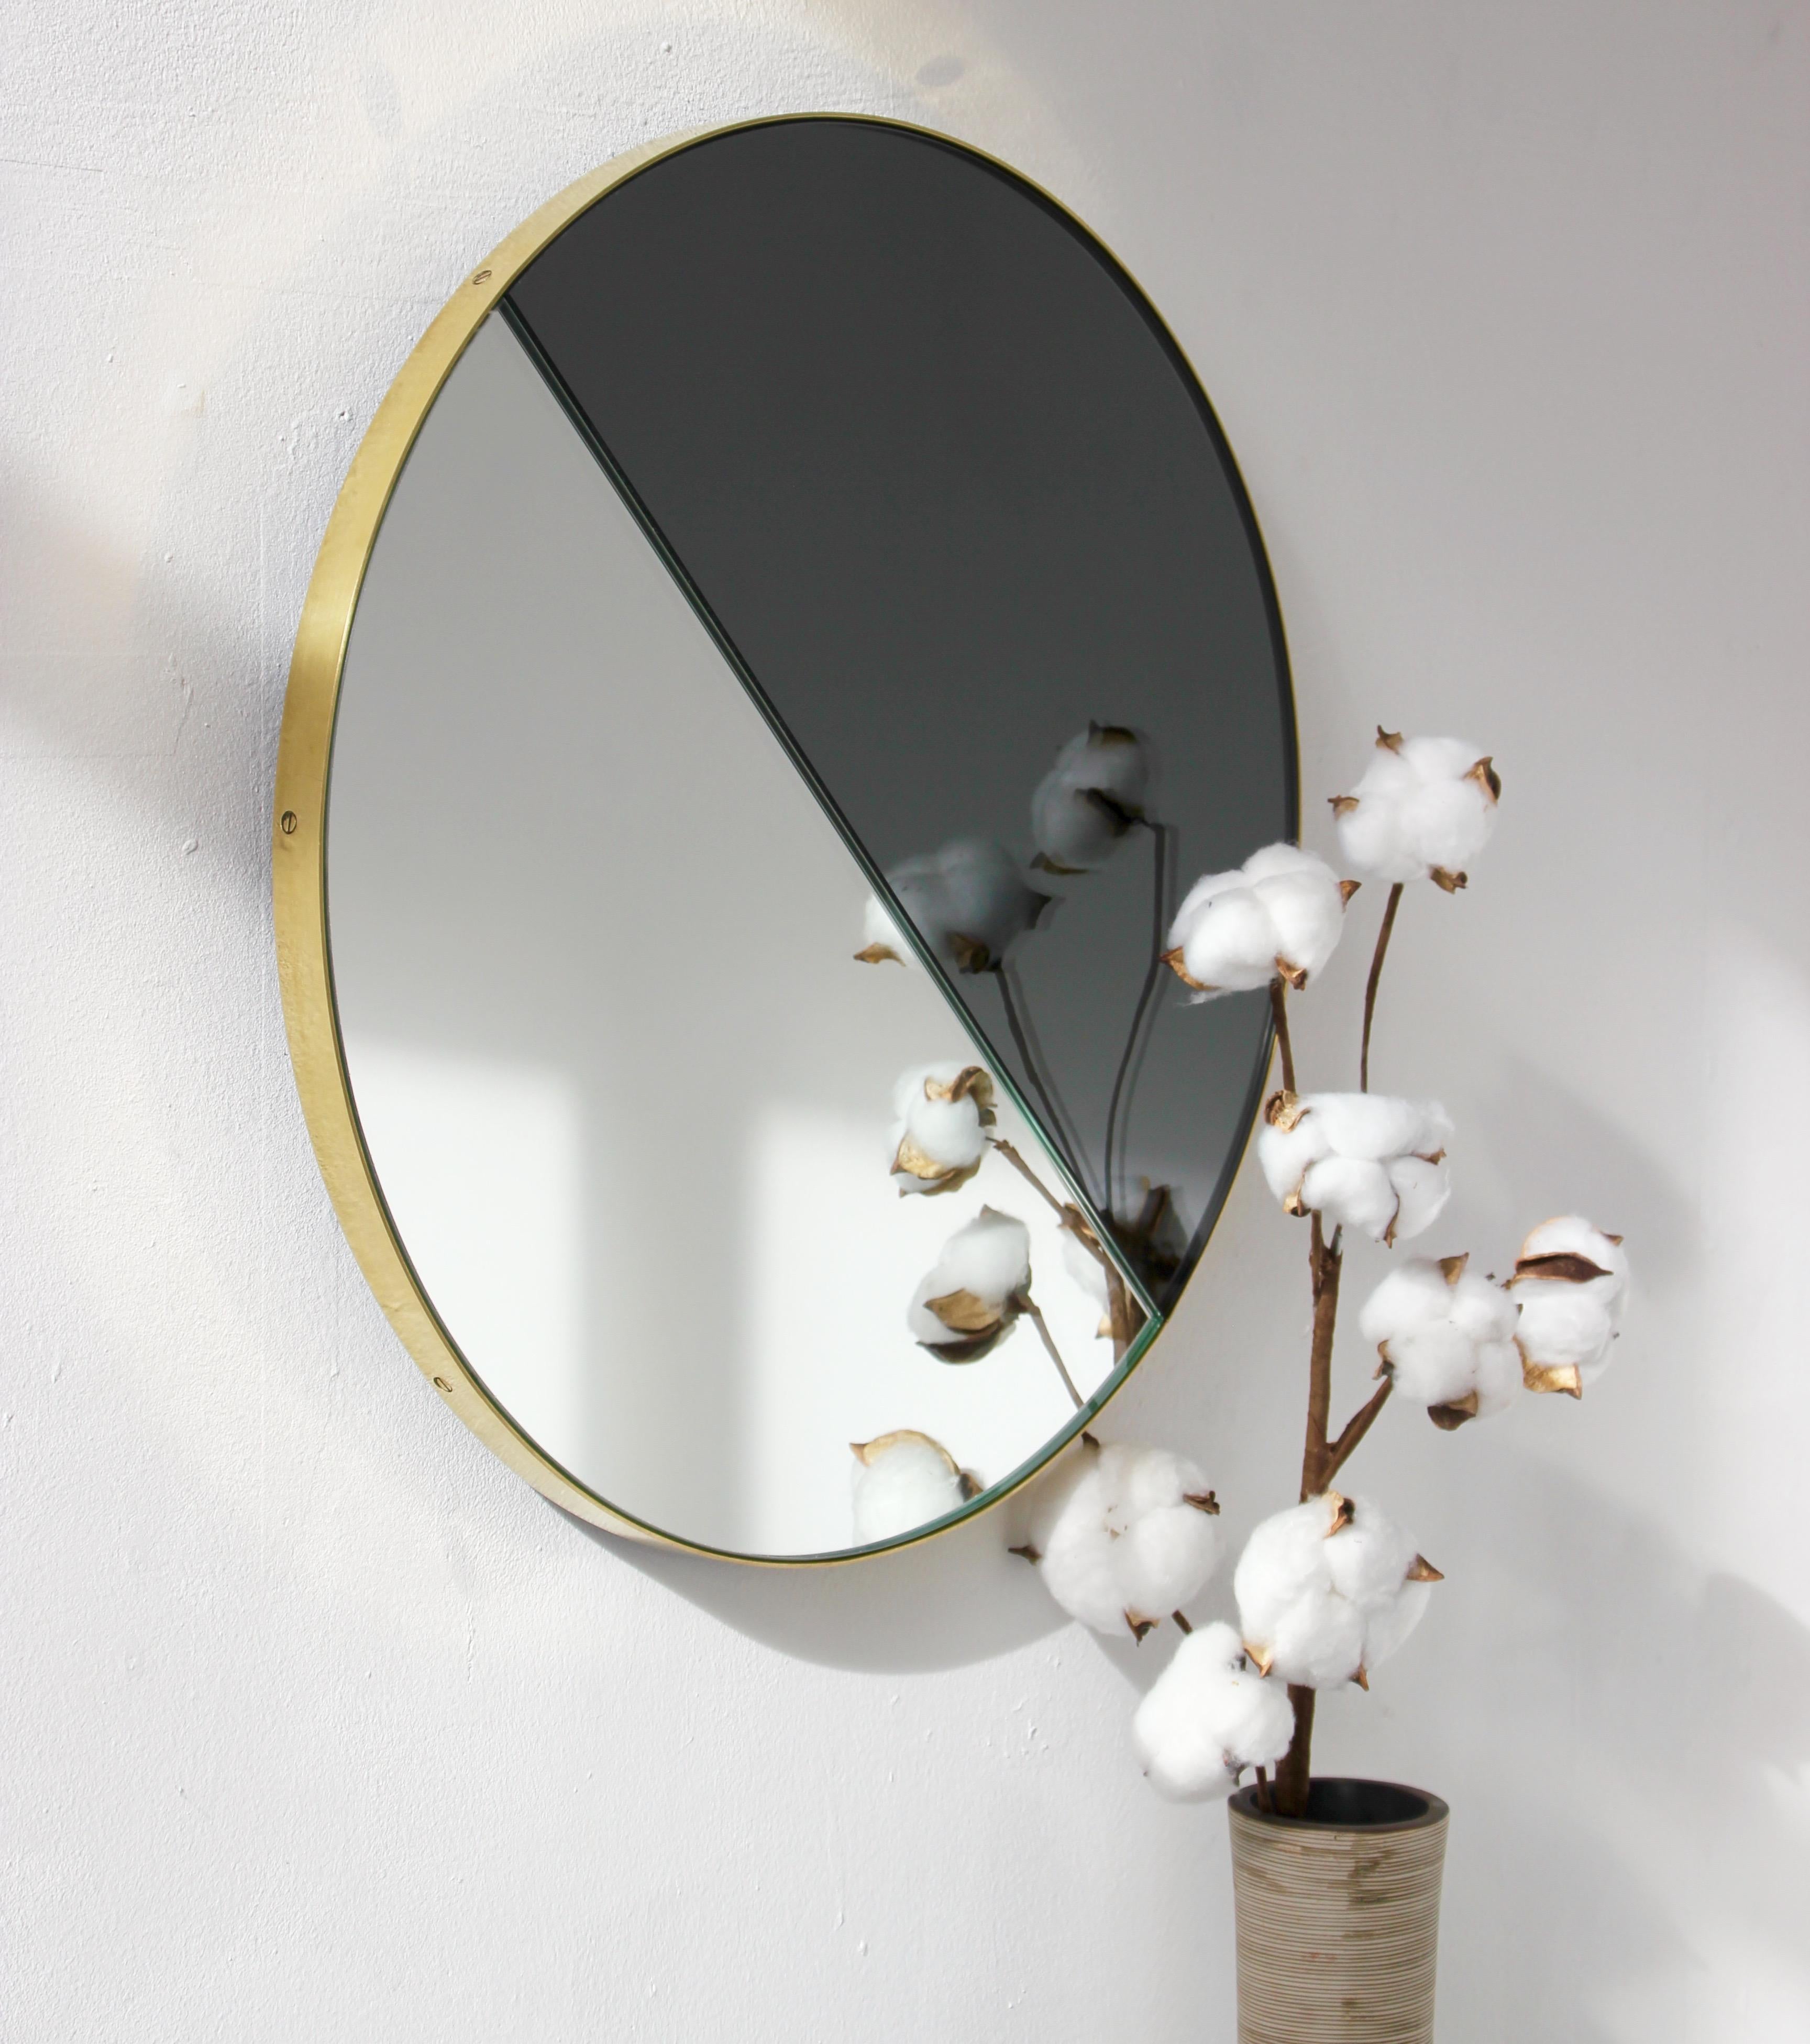 Contemporary mixed bronze and silver mirror tints Dualis Orbis with a brushed brass frame. Designed and handcrafted in London, UK.

Fitted with a specialist hanging system that allows the mirror to be hung in four different positions.

This mirror